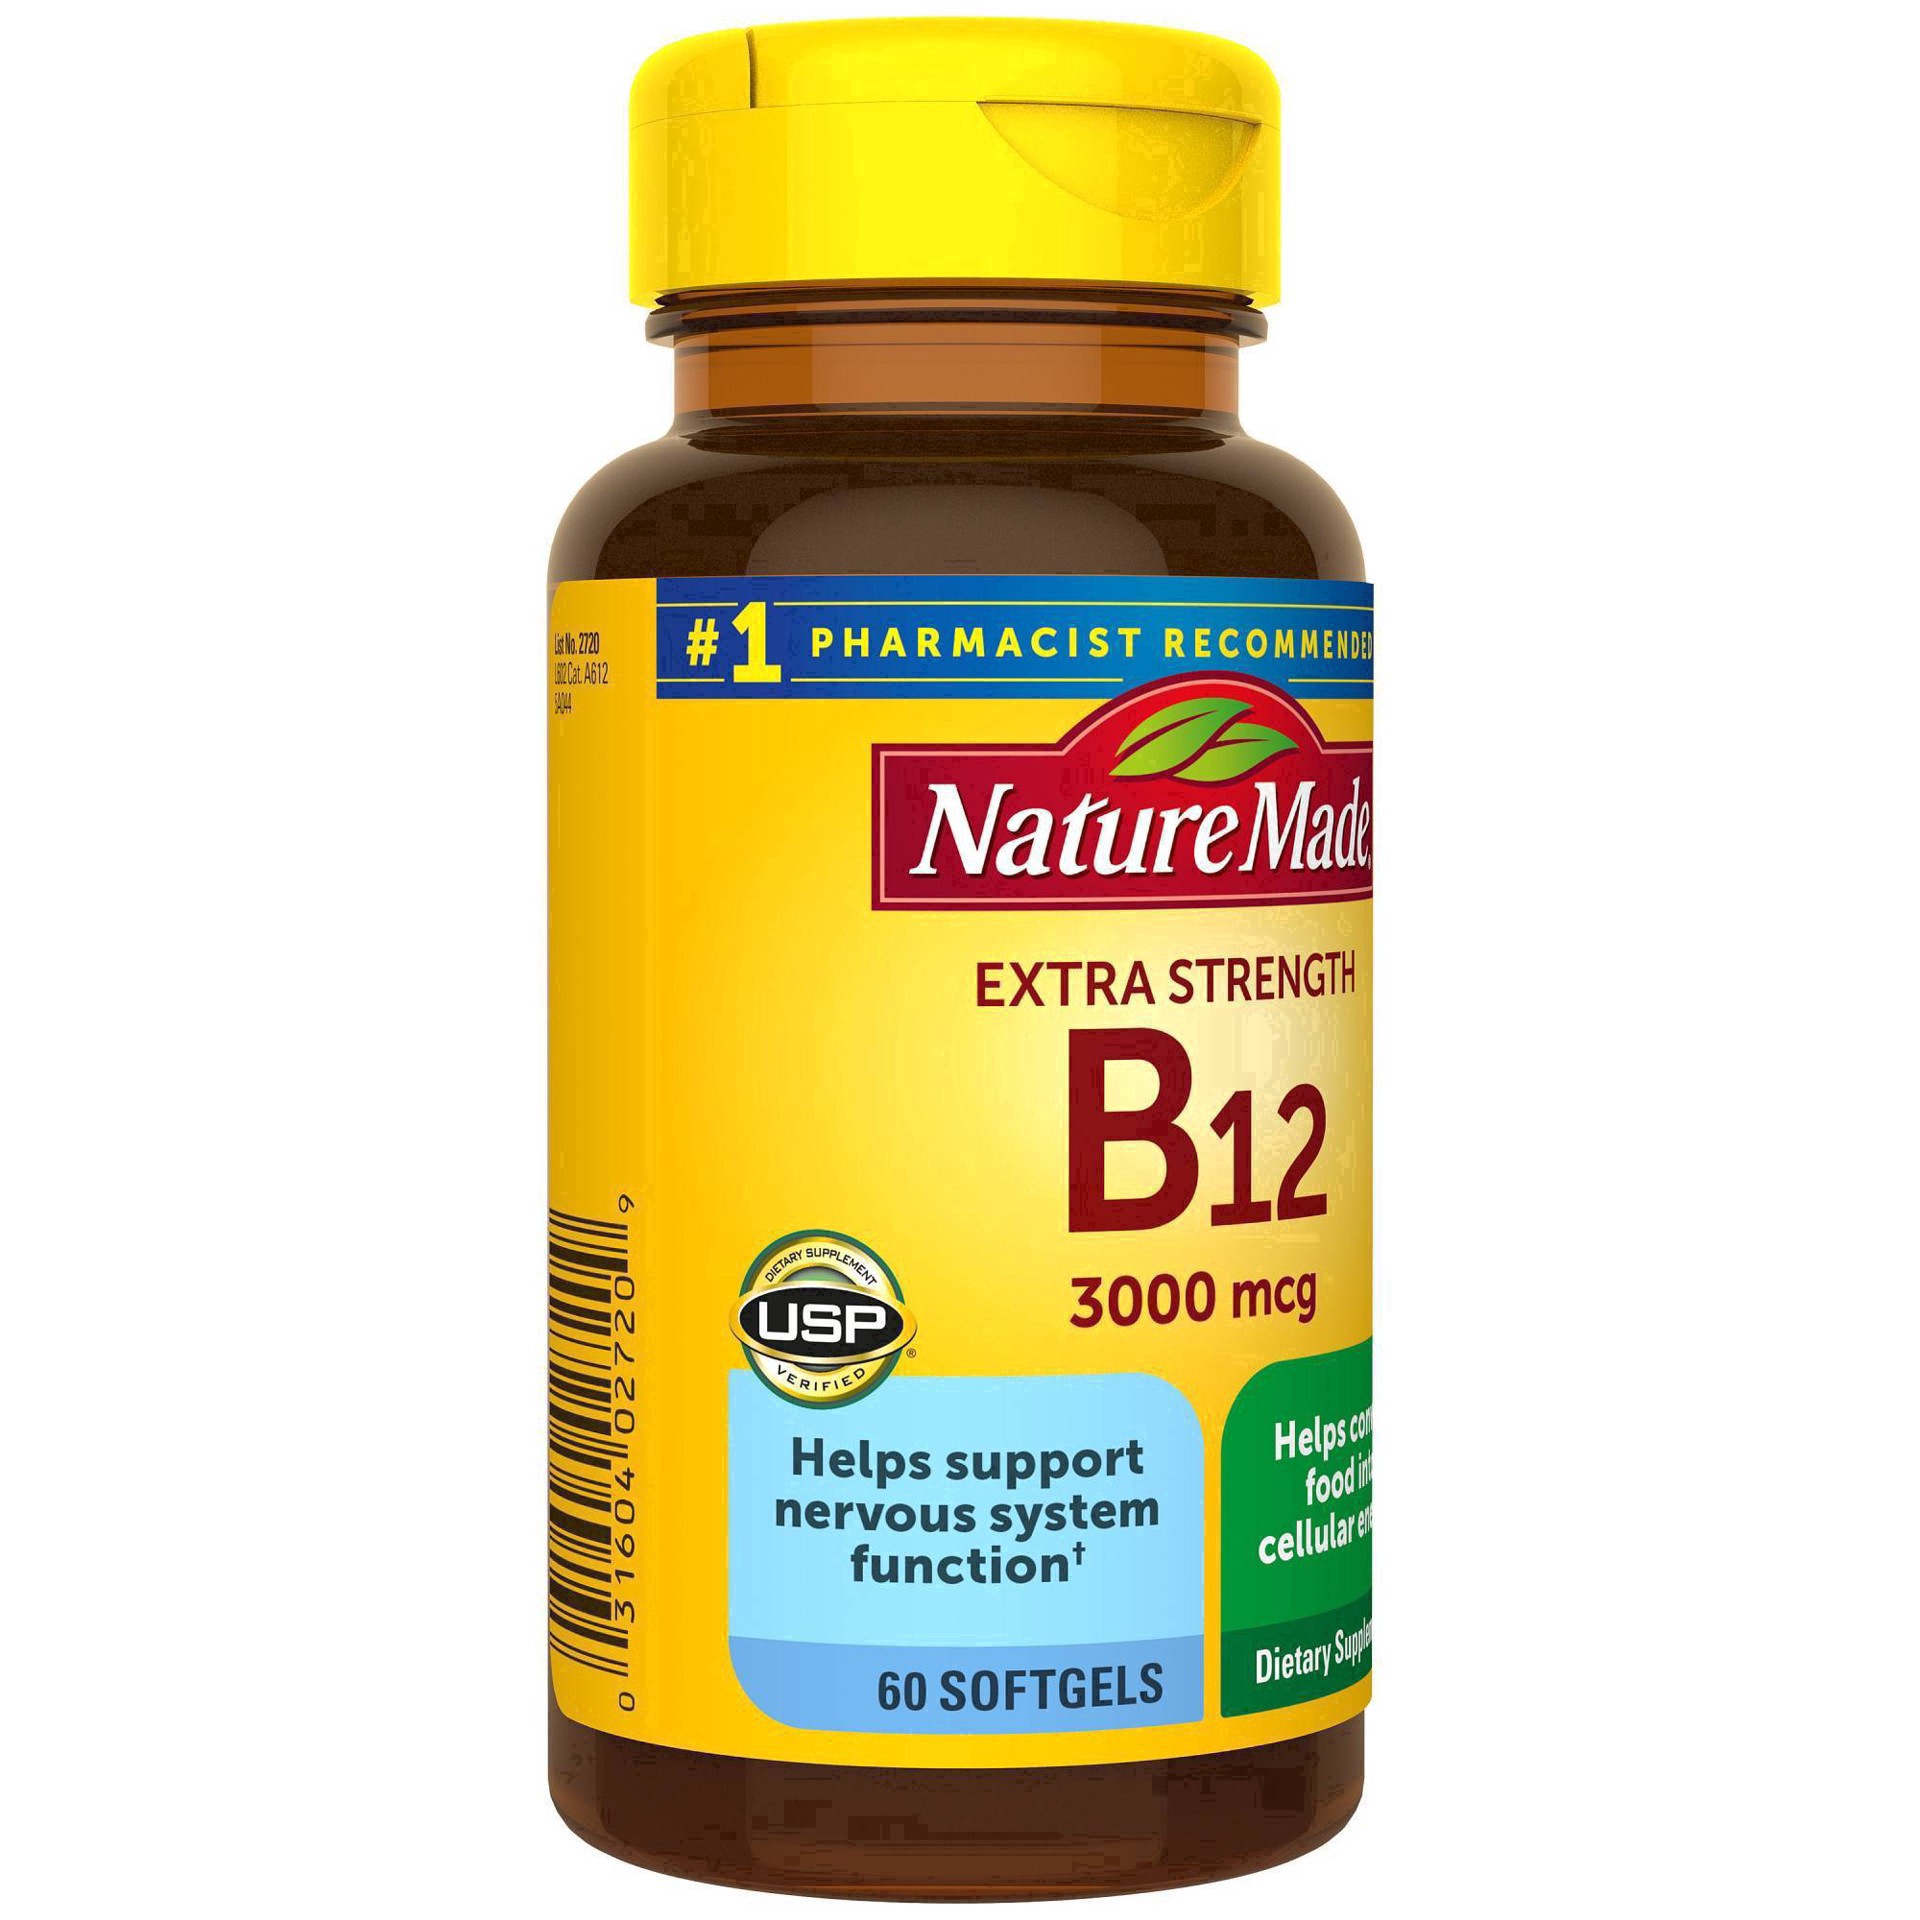 slide 18 of 74, Nature Made Extra Strength Vitamin B12 3000 mcg Energy Metabolism Support Softgels - 60ct, 60 ct